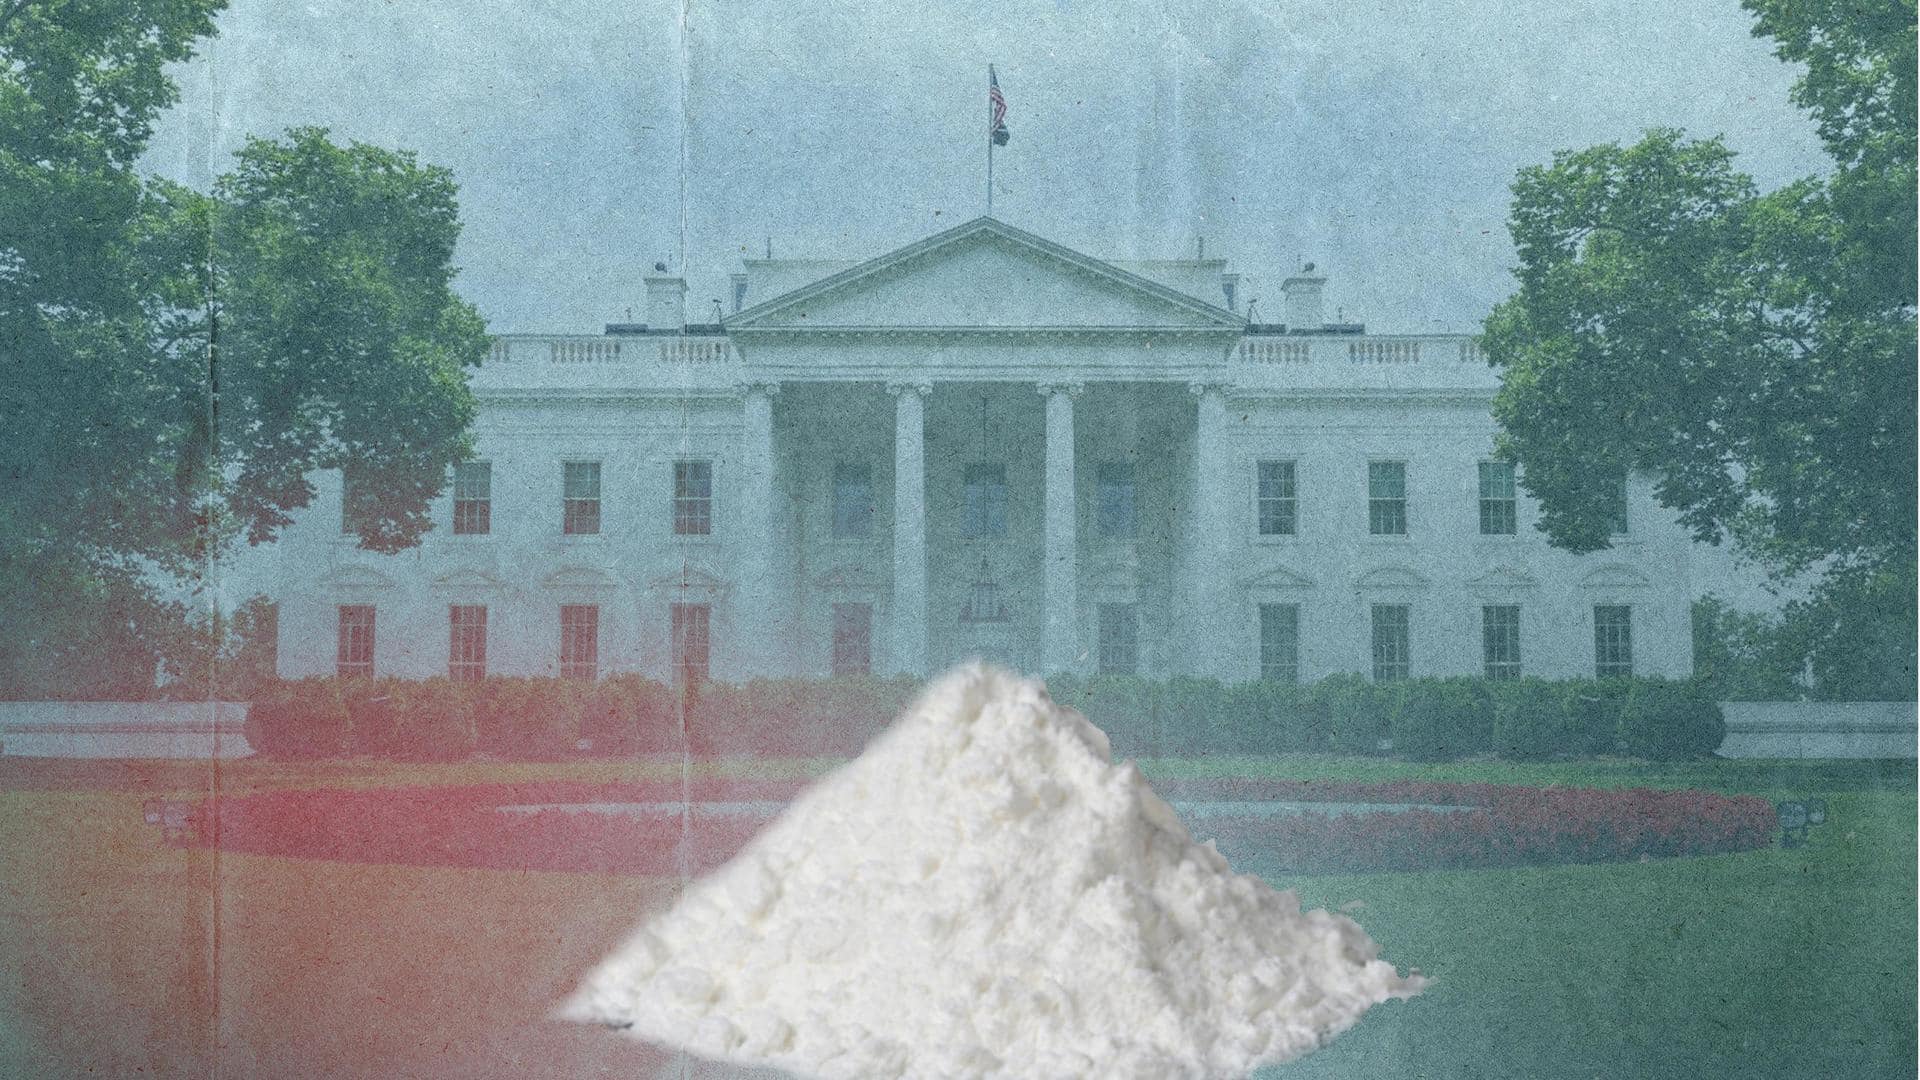 Cameras, visitor logs checked after cocaine found at White House